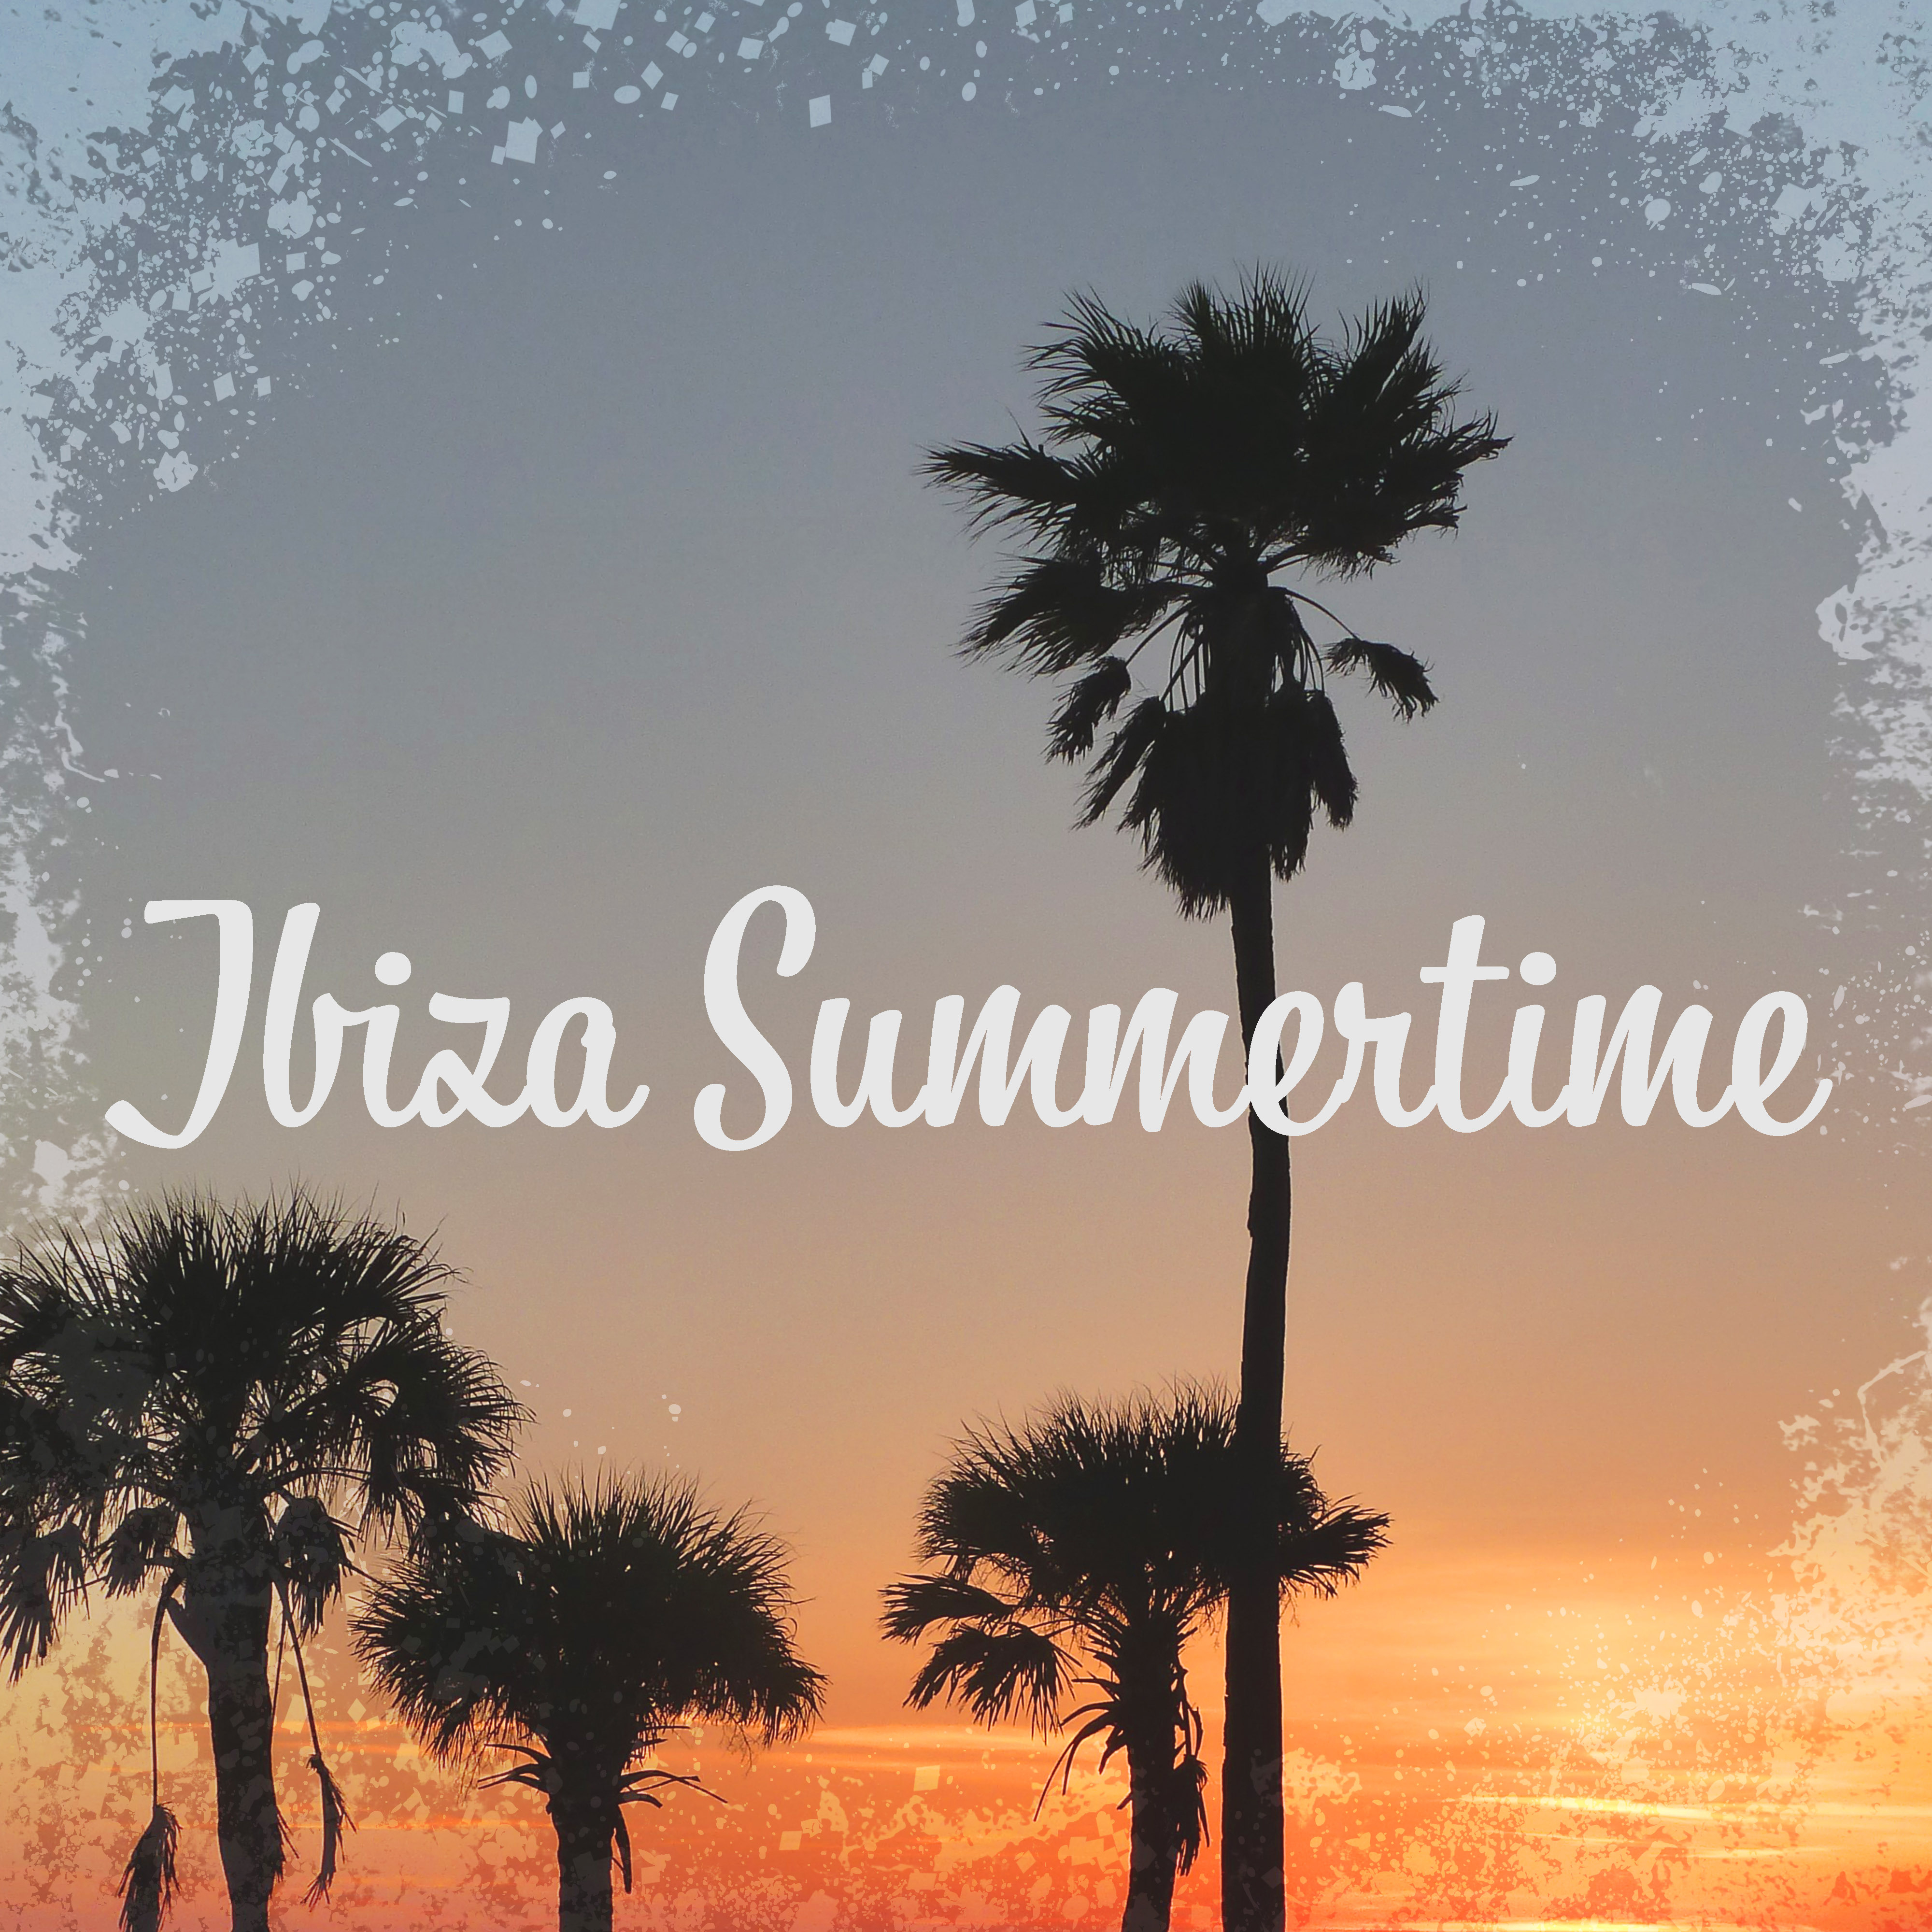 Ibiza Summertime – Chill Out 2017, Relaxation, **** Vibes, Summer Chill, Deep Beats, Sensuality